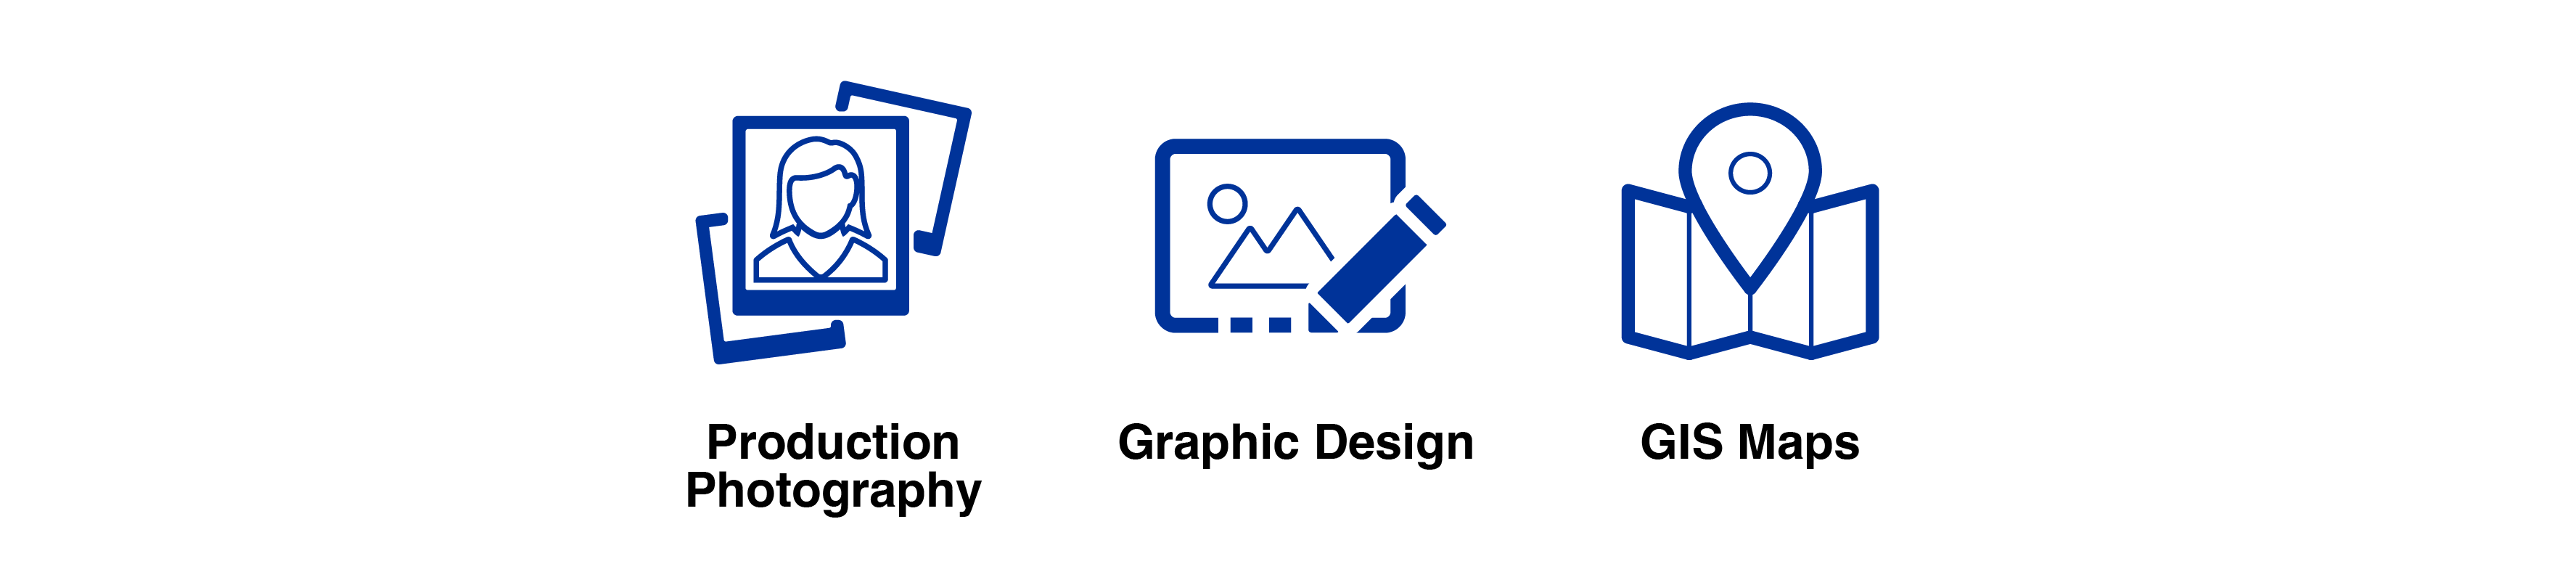 Production Photography | Graphic Design | GIS Maps